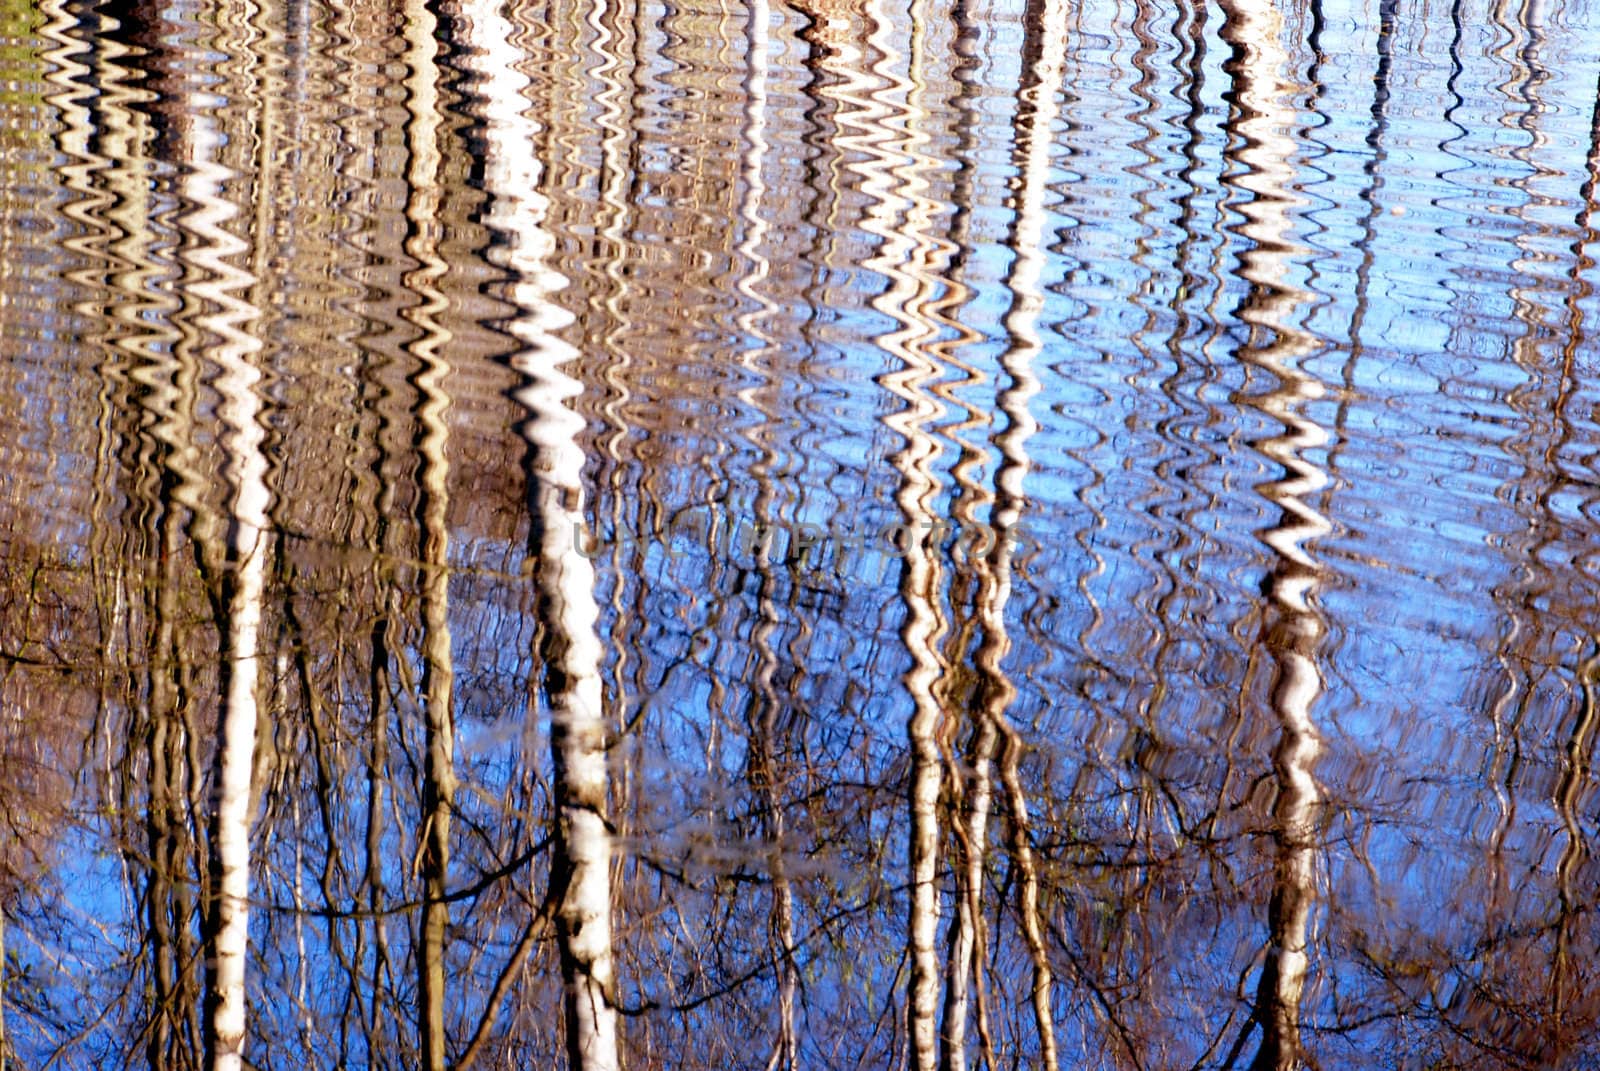 Birch reflection on water by sauletas